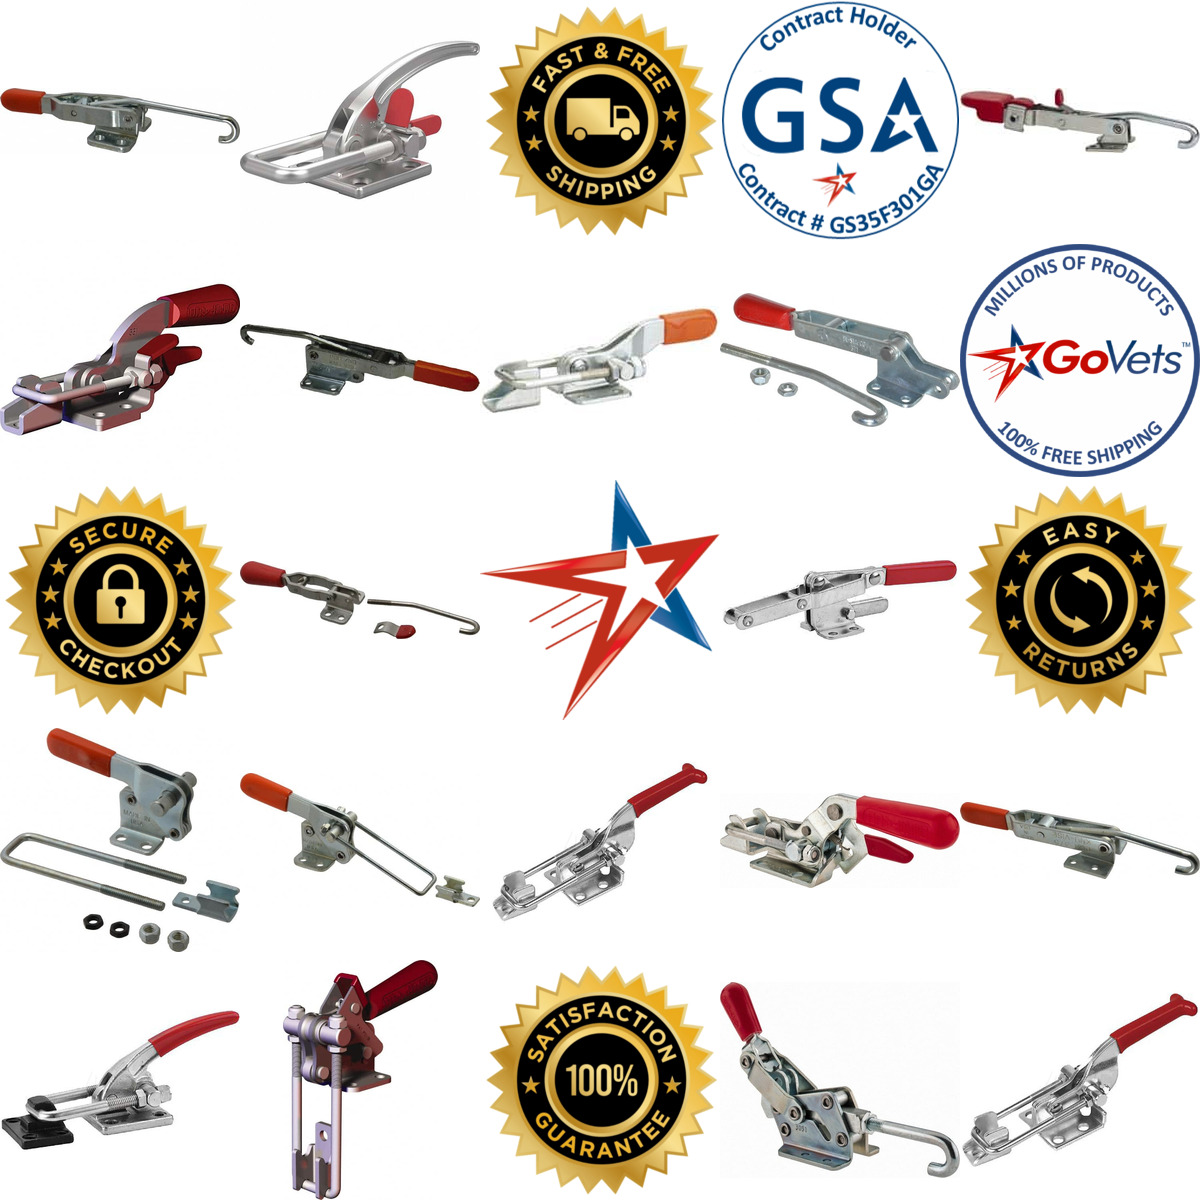 A selection of Pull Action Latch Clamps products on GoVets